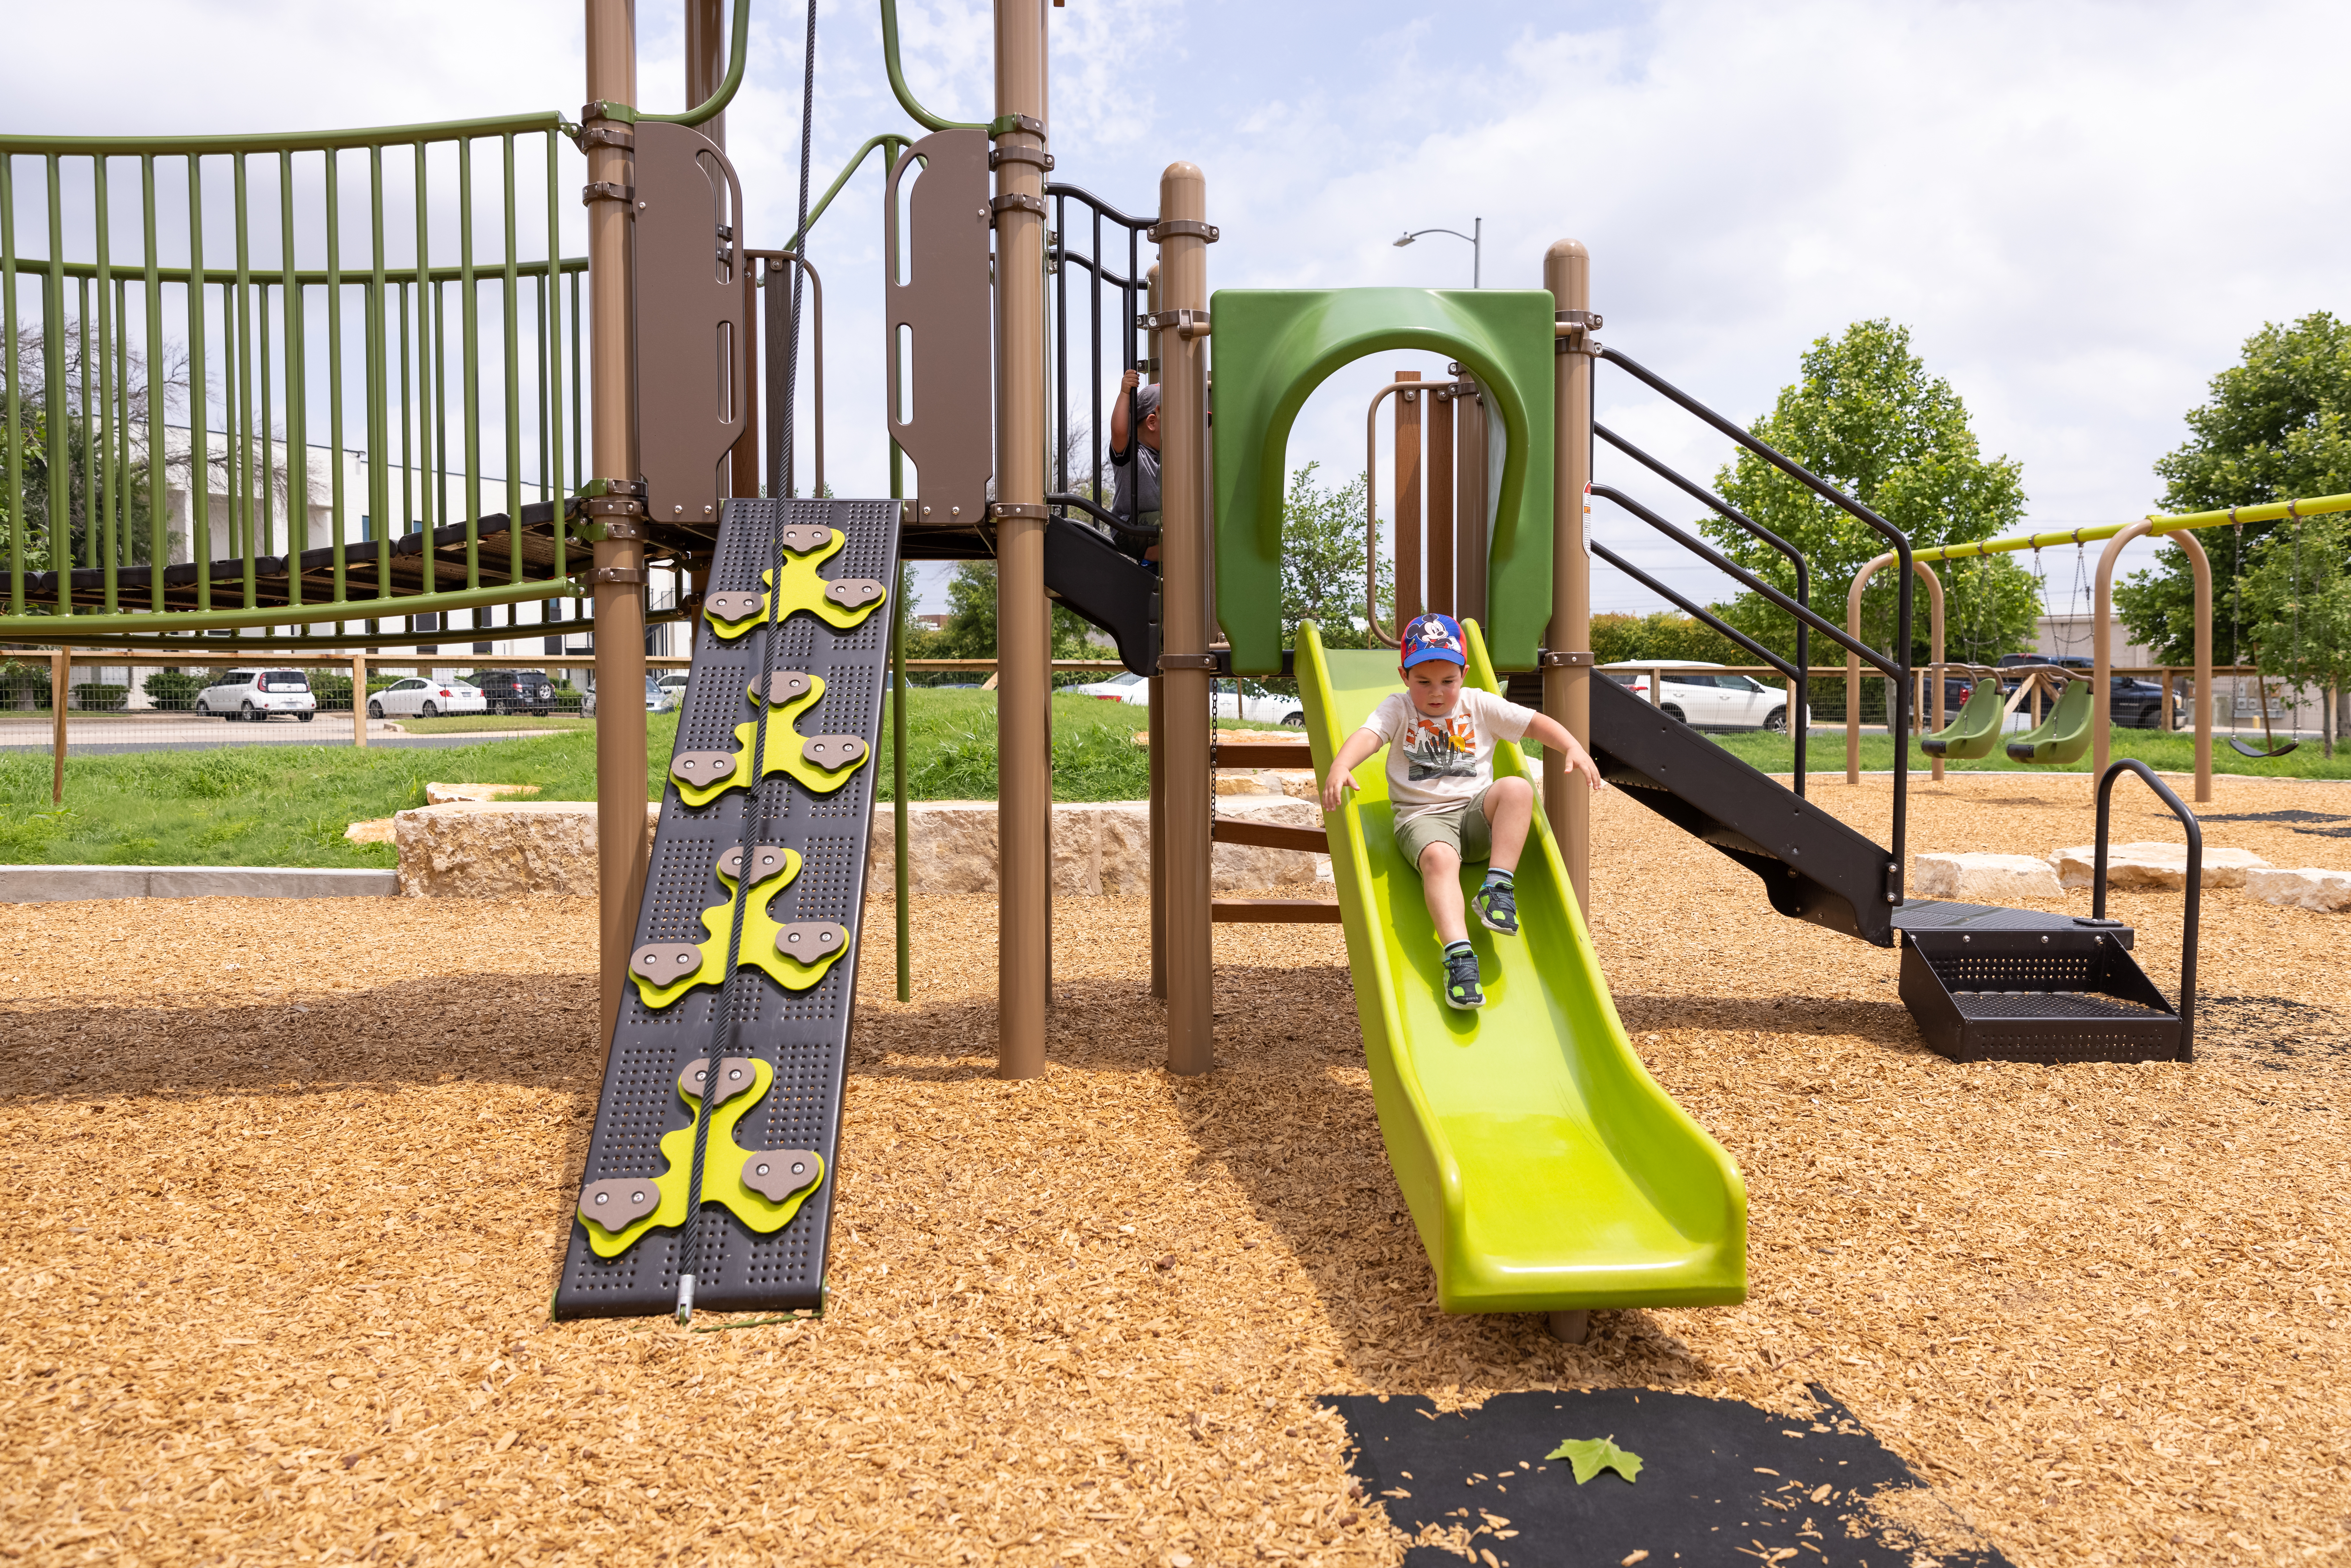 Featured image for “Project Playback: Alderbrook Pocket Park Playground Renovation”